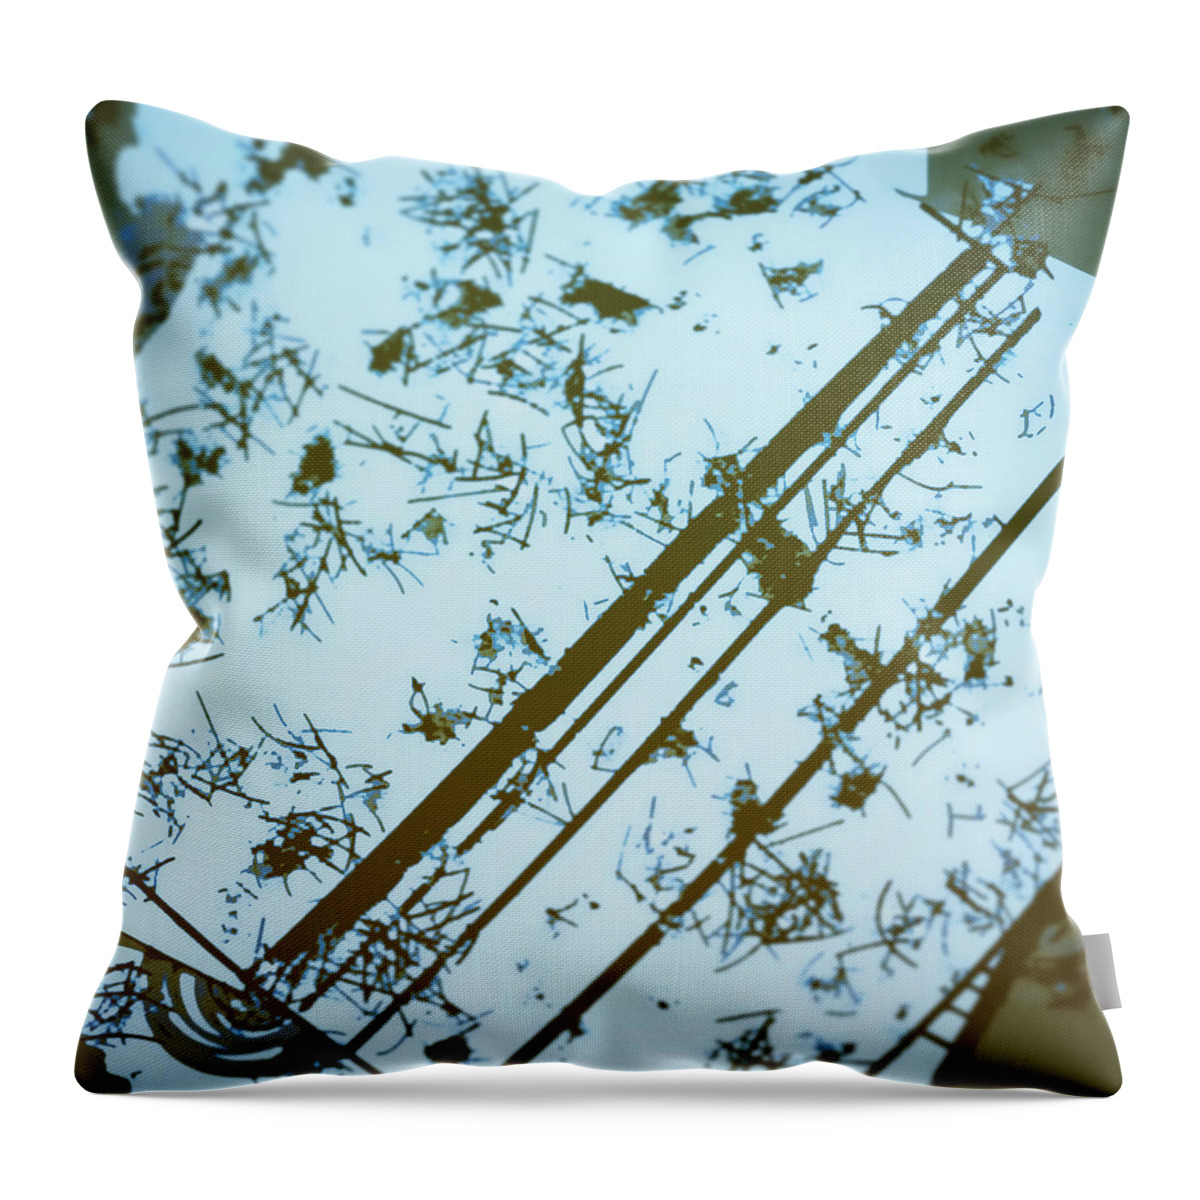 Abstract Throw Pillow featuring the digital art Pattern 18 by Marko Sabotin